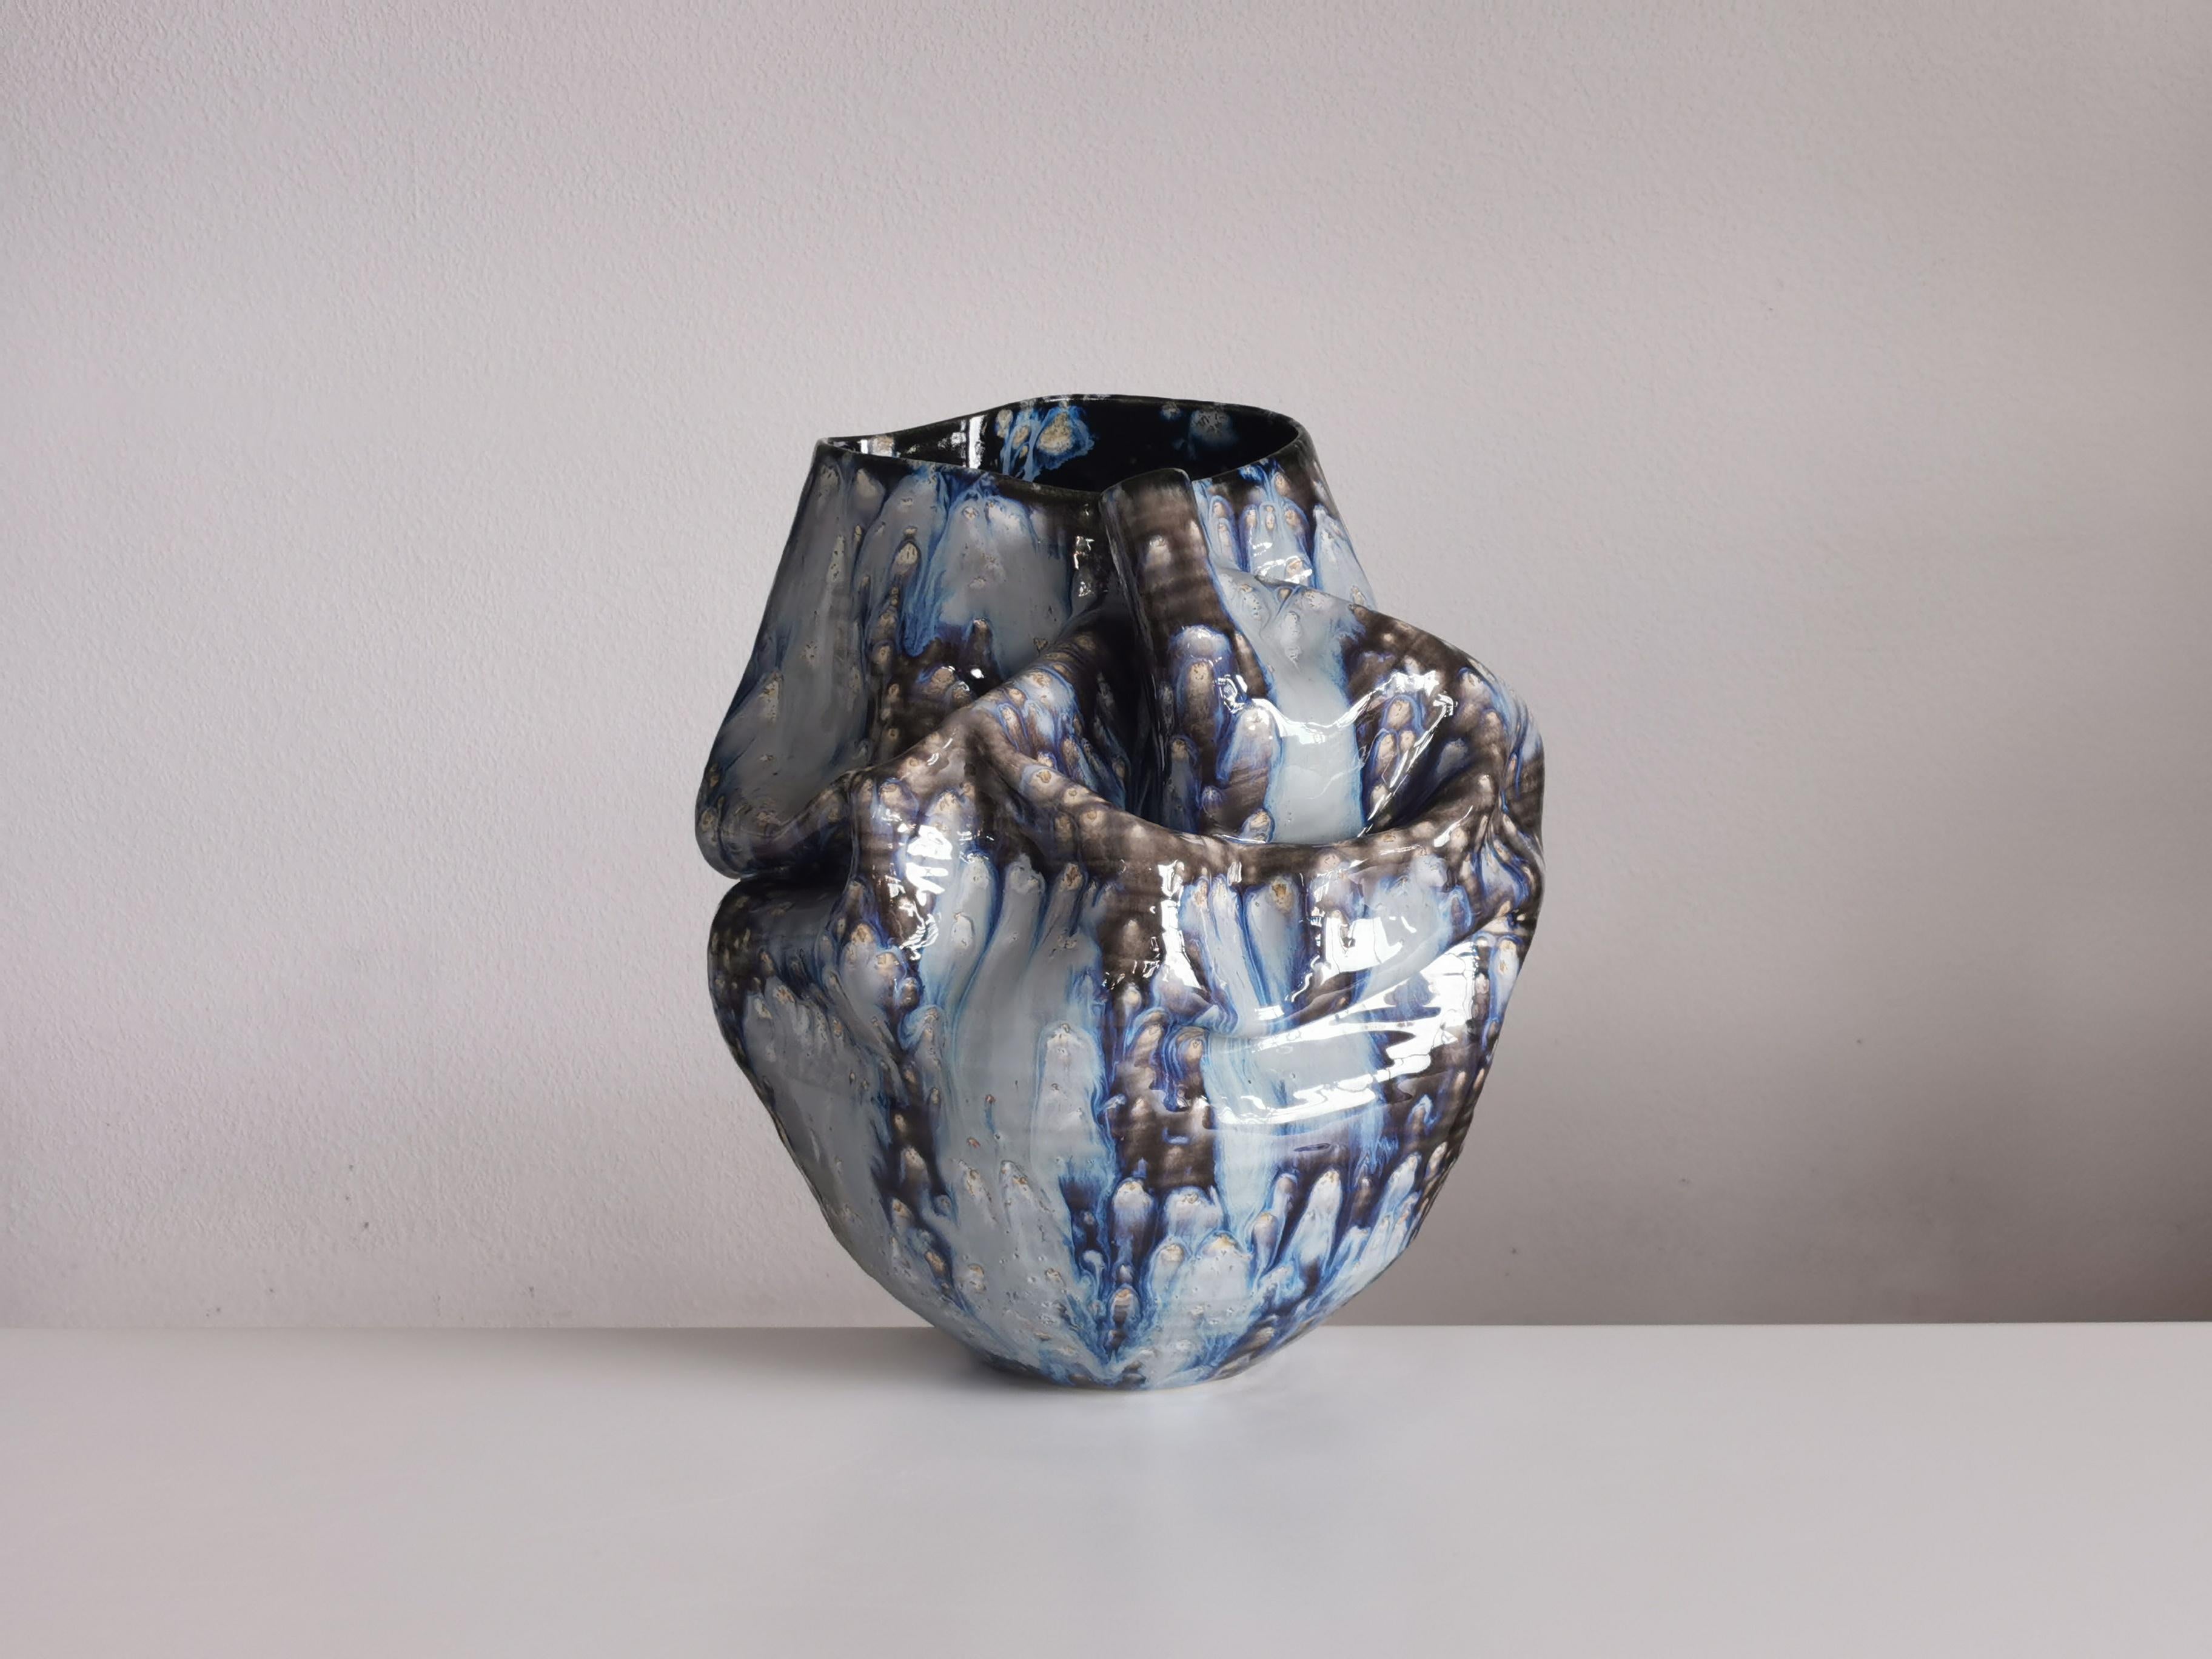 New sumptuous ceramic vessel from ceramic artist Nicholas Arroyave-Portela. Made in 2021.

Materials: White St.Thomas clay, Stoneware glazes, multi fired to cone 8 (1249 degrees)

Measures: 36 cm tall, 30 cm wide, 30 cm deep
Weight: 5.4 Kg

(Vessel,